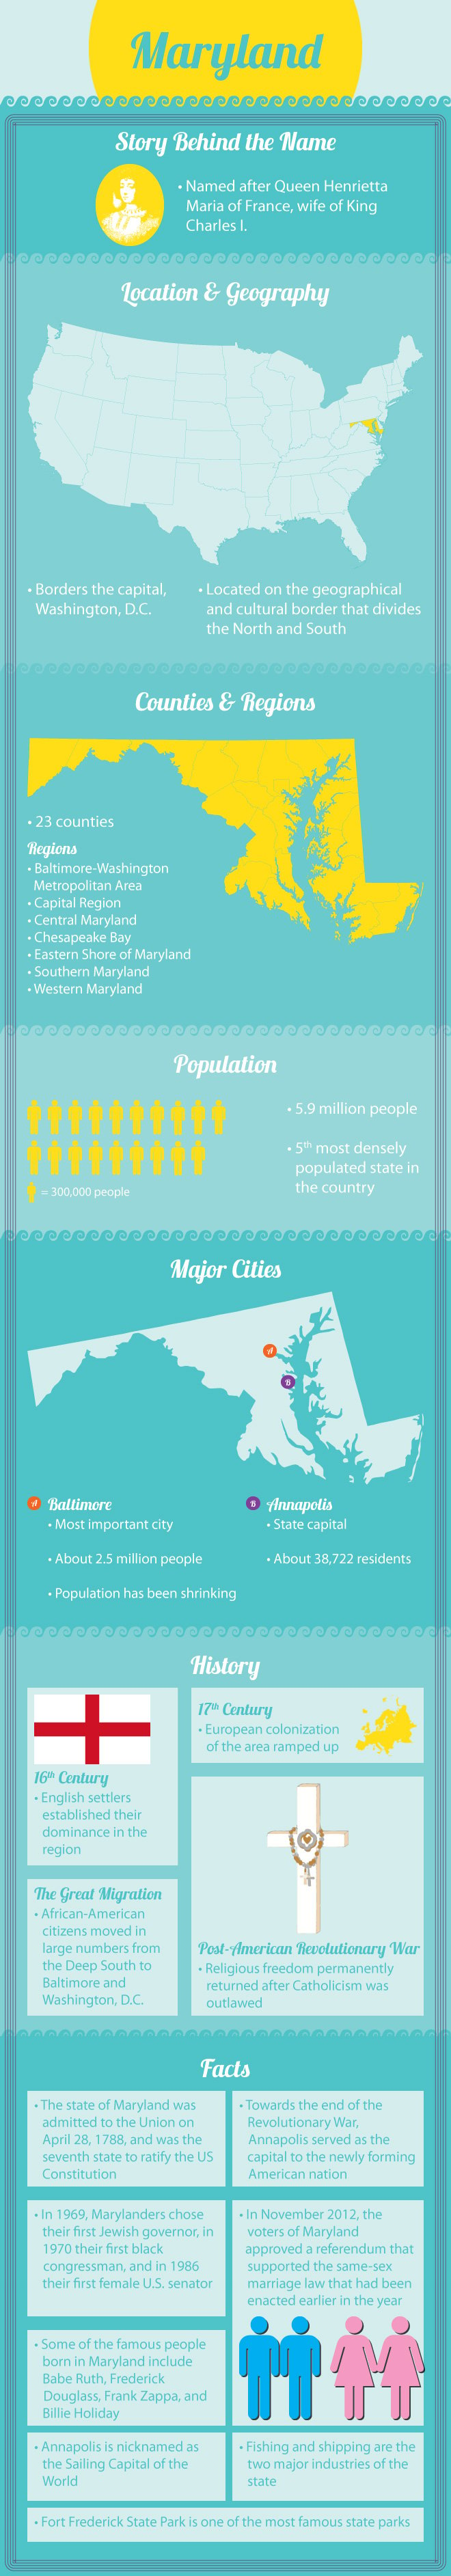 Infographic of Maryland Fast Facts